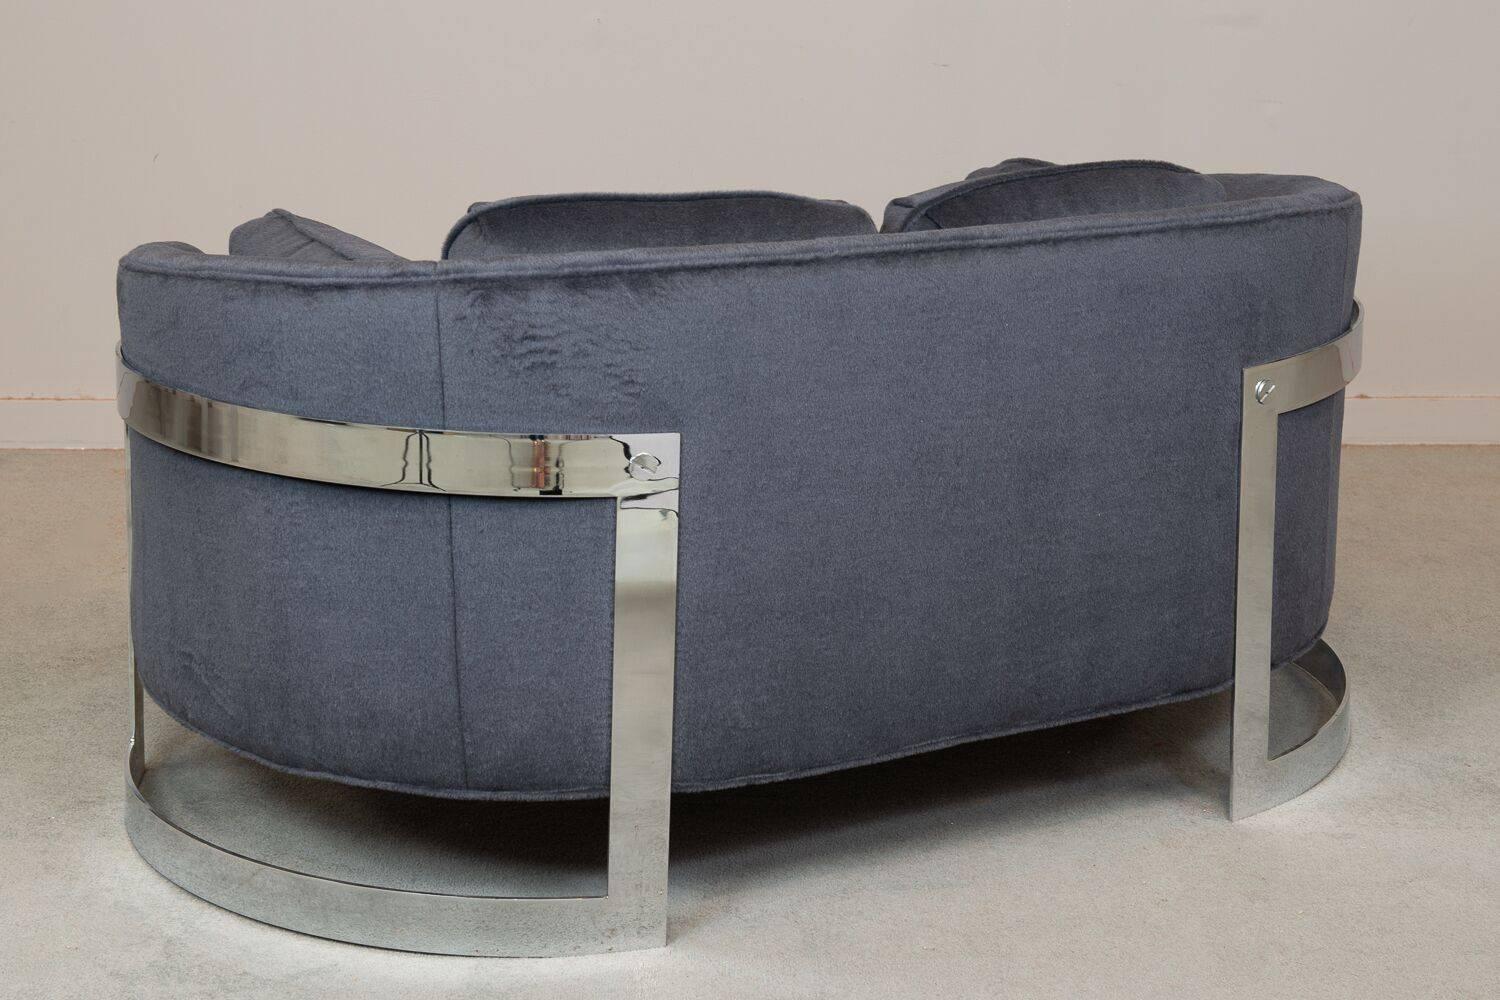 Midcentury curved sofa by Milo Baughman with chrome base and mohair upholstery. Measures: Seat H 18.5